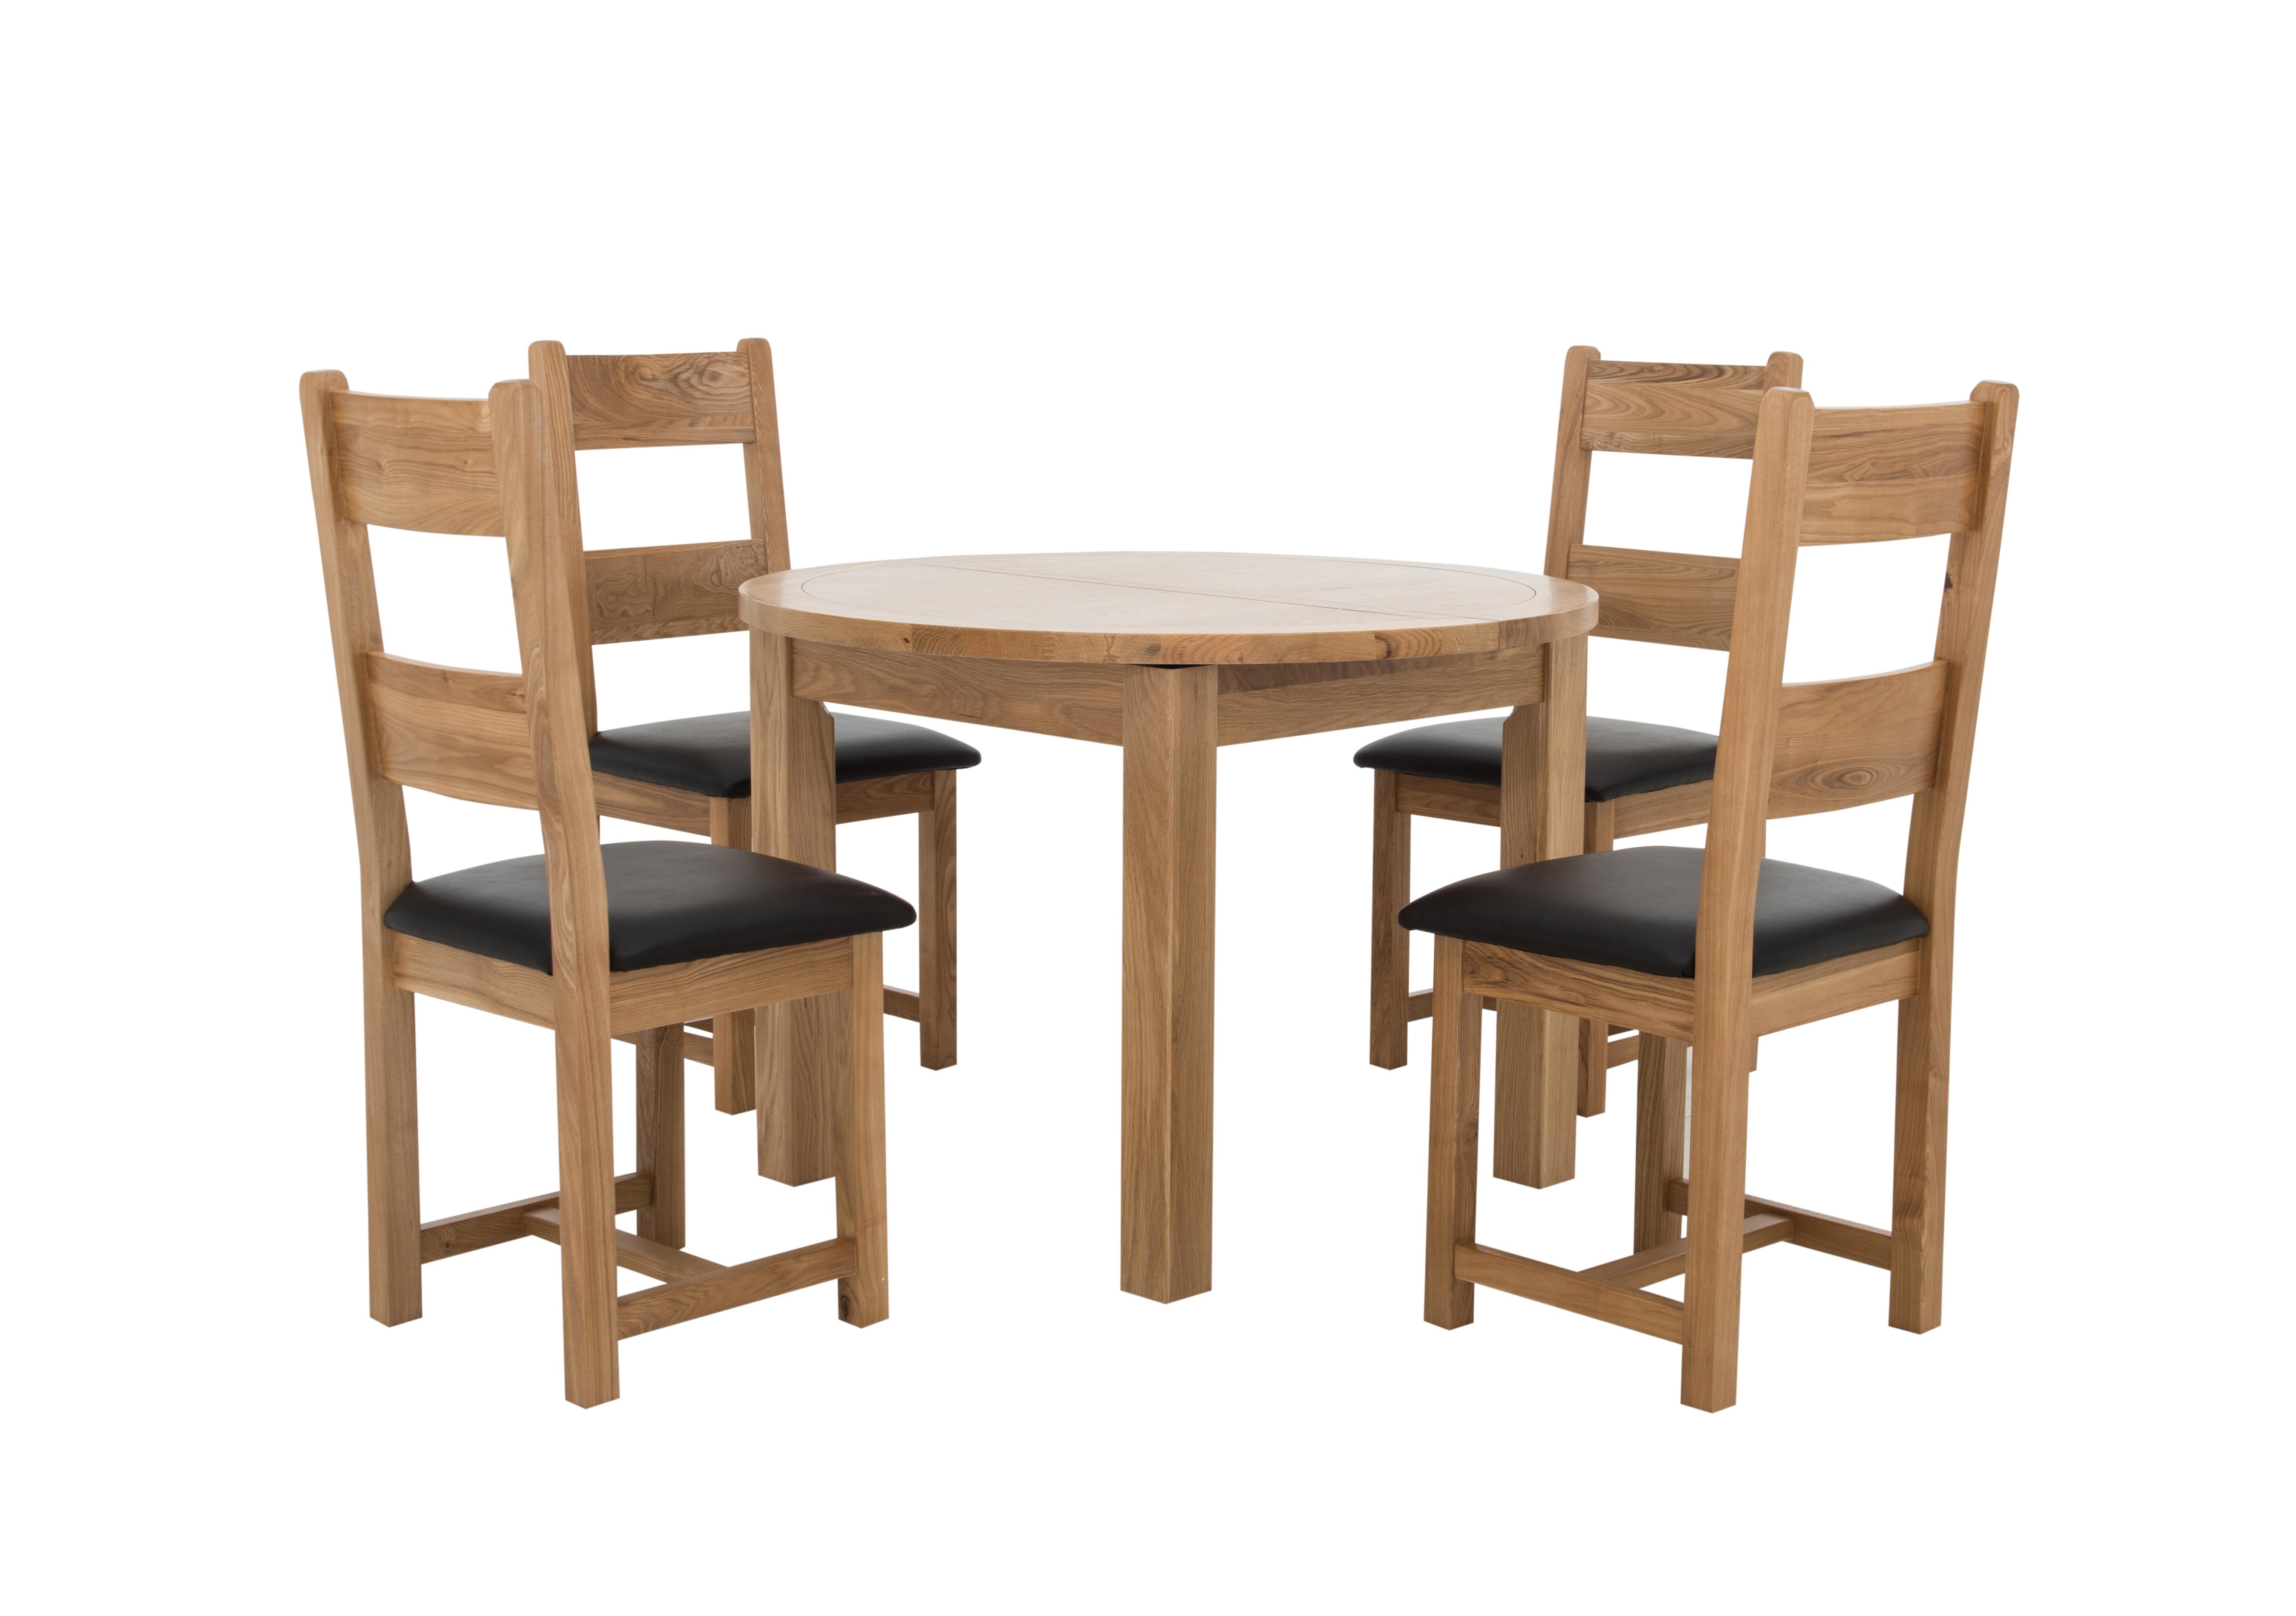 California Round Solid Oak Extending Dining Table and 4 Wood Ladder Back Chairs in  on Furniture Village